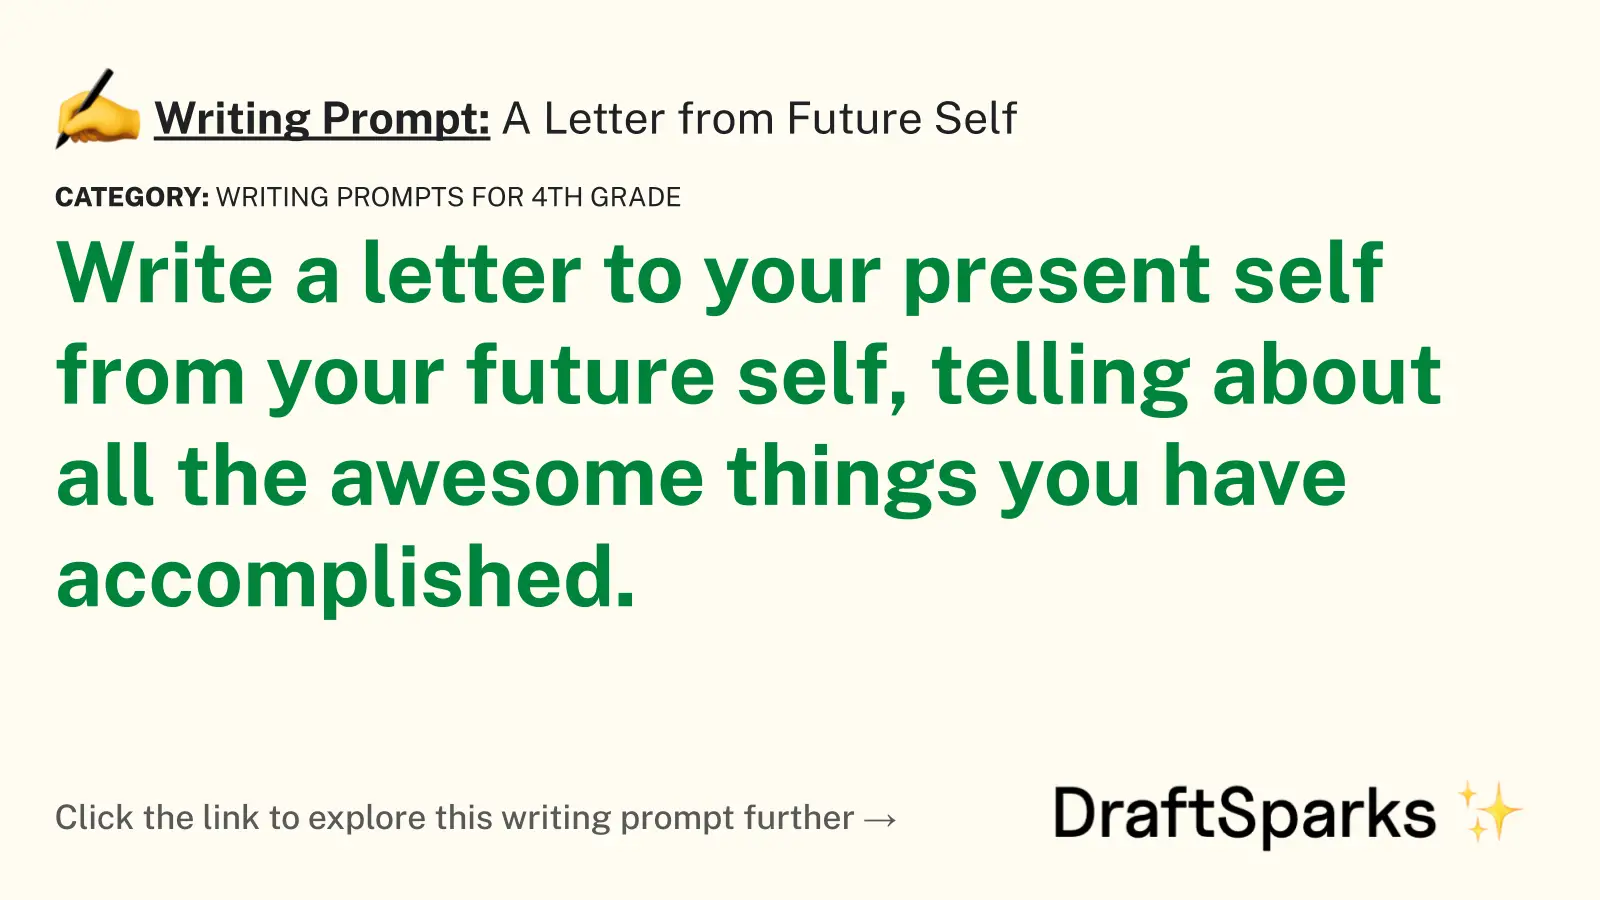 A Letter from Future Self